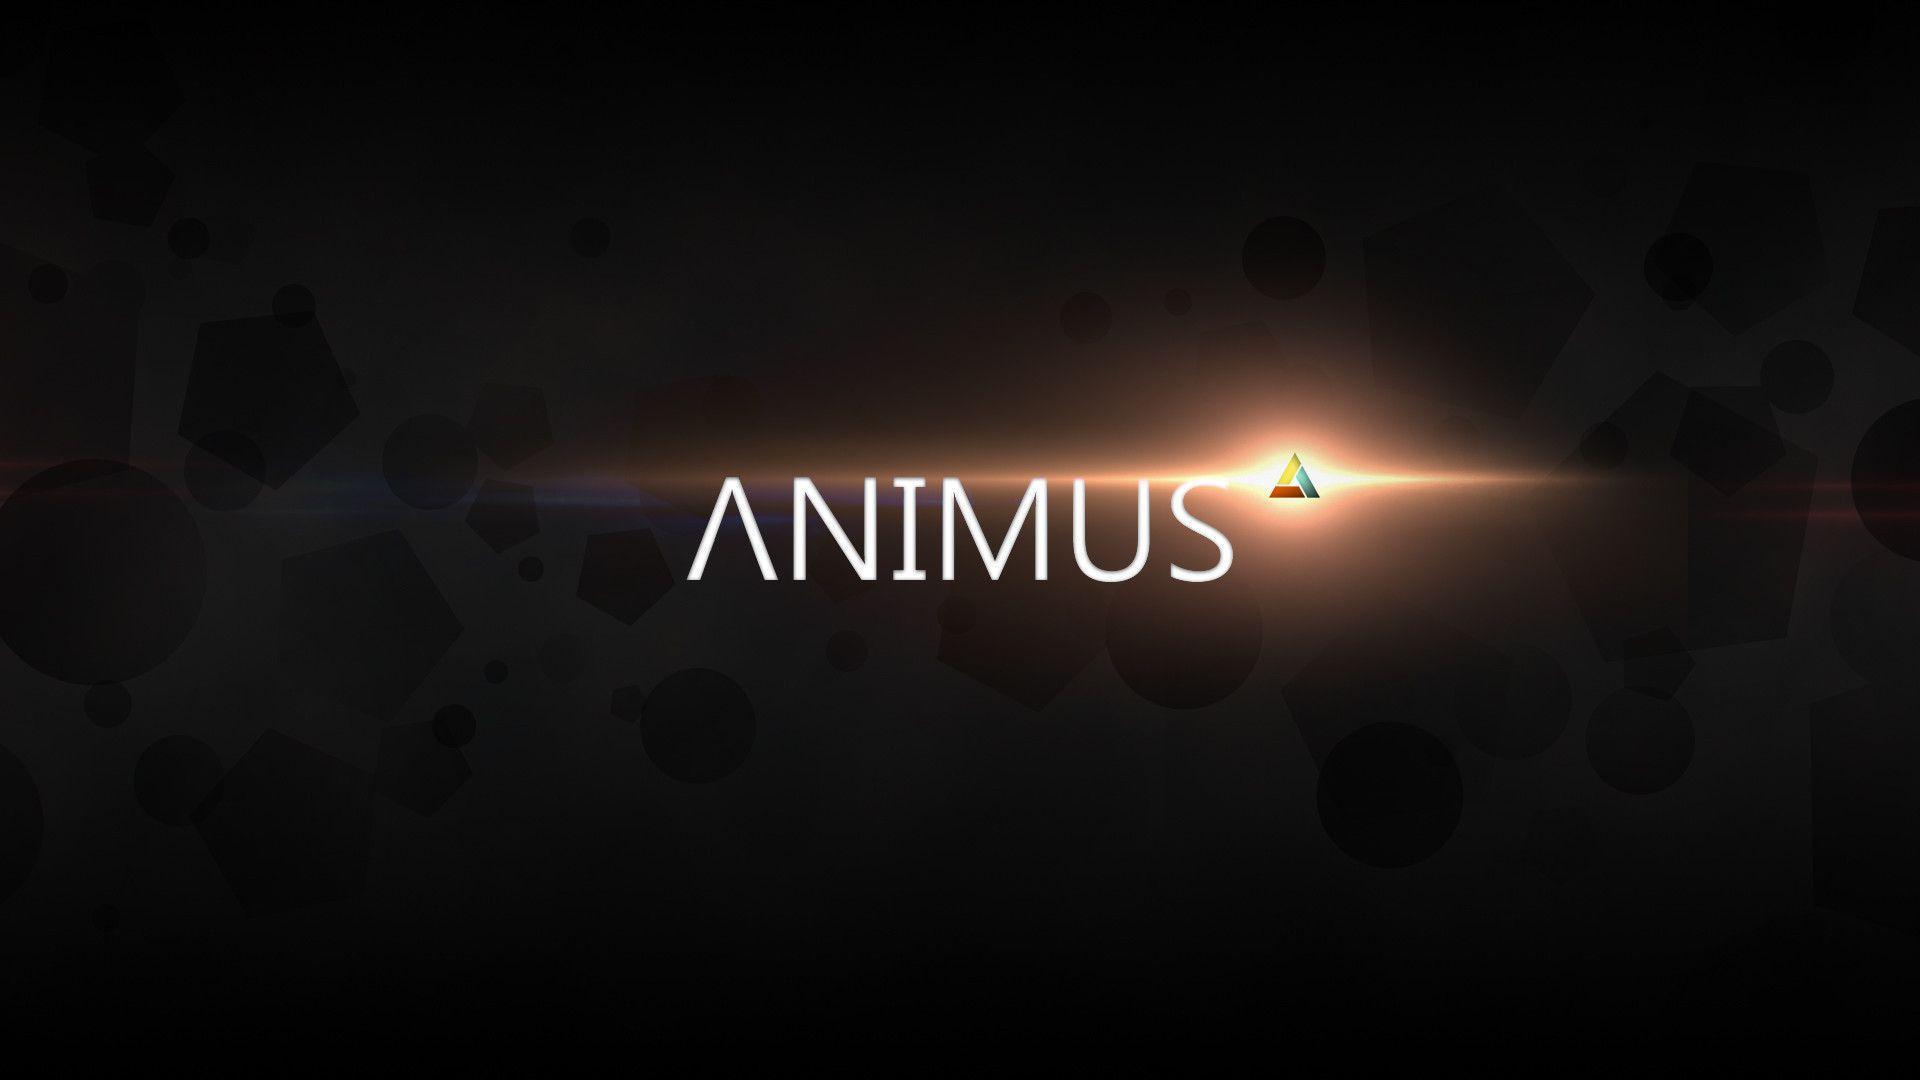 Animus Wallpapers - Wallpaper Cave